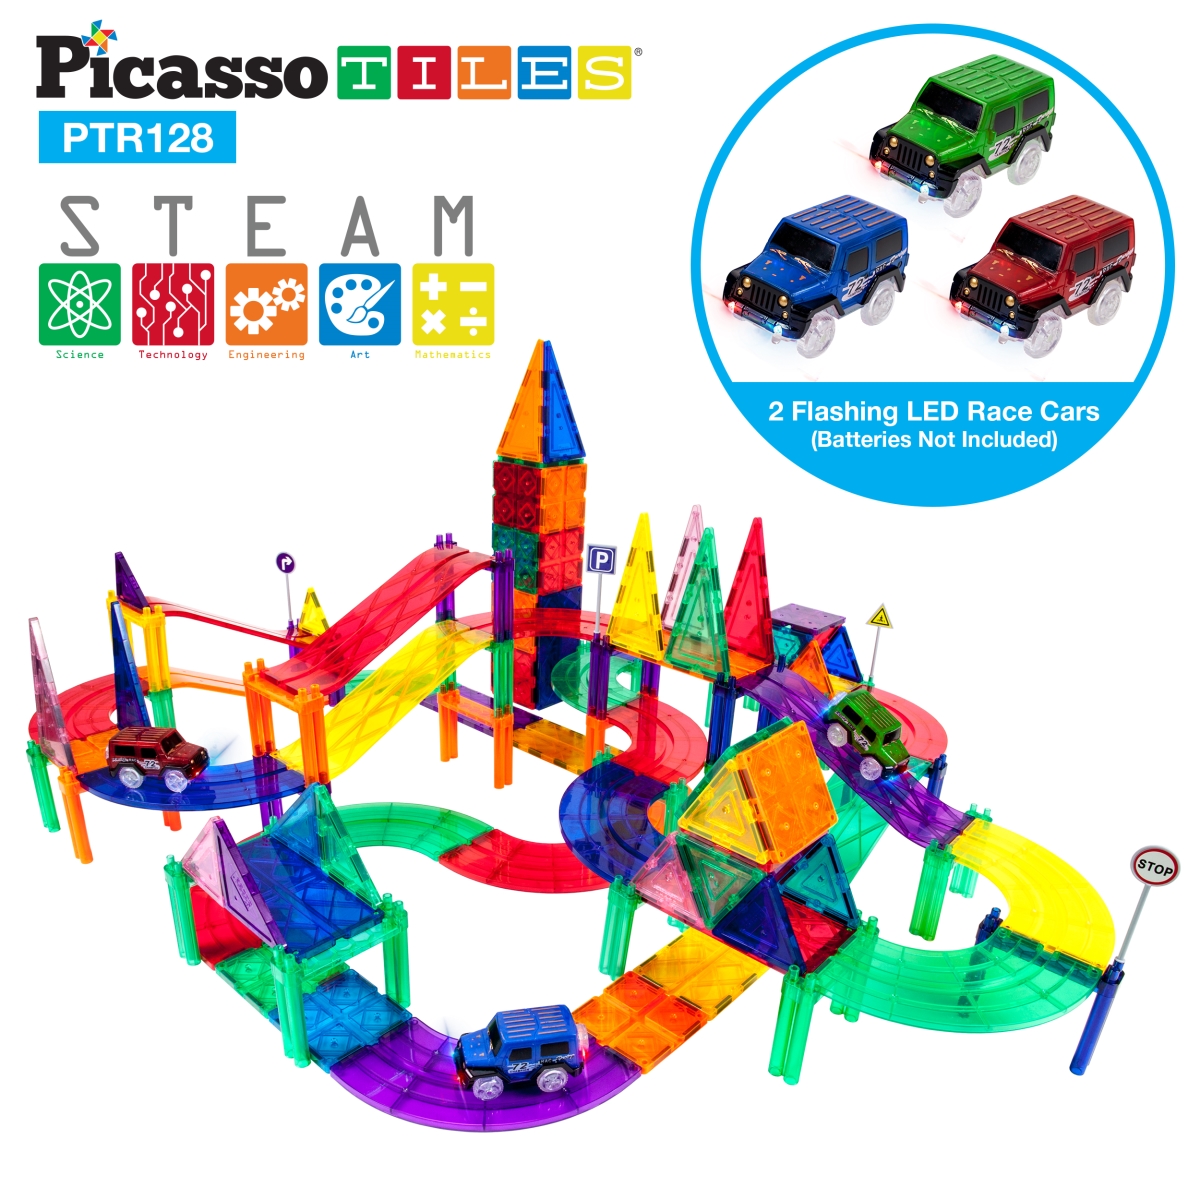 Picasso Tiles PTR128